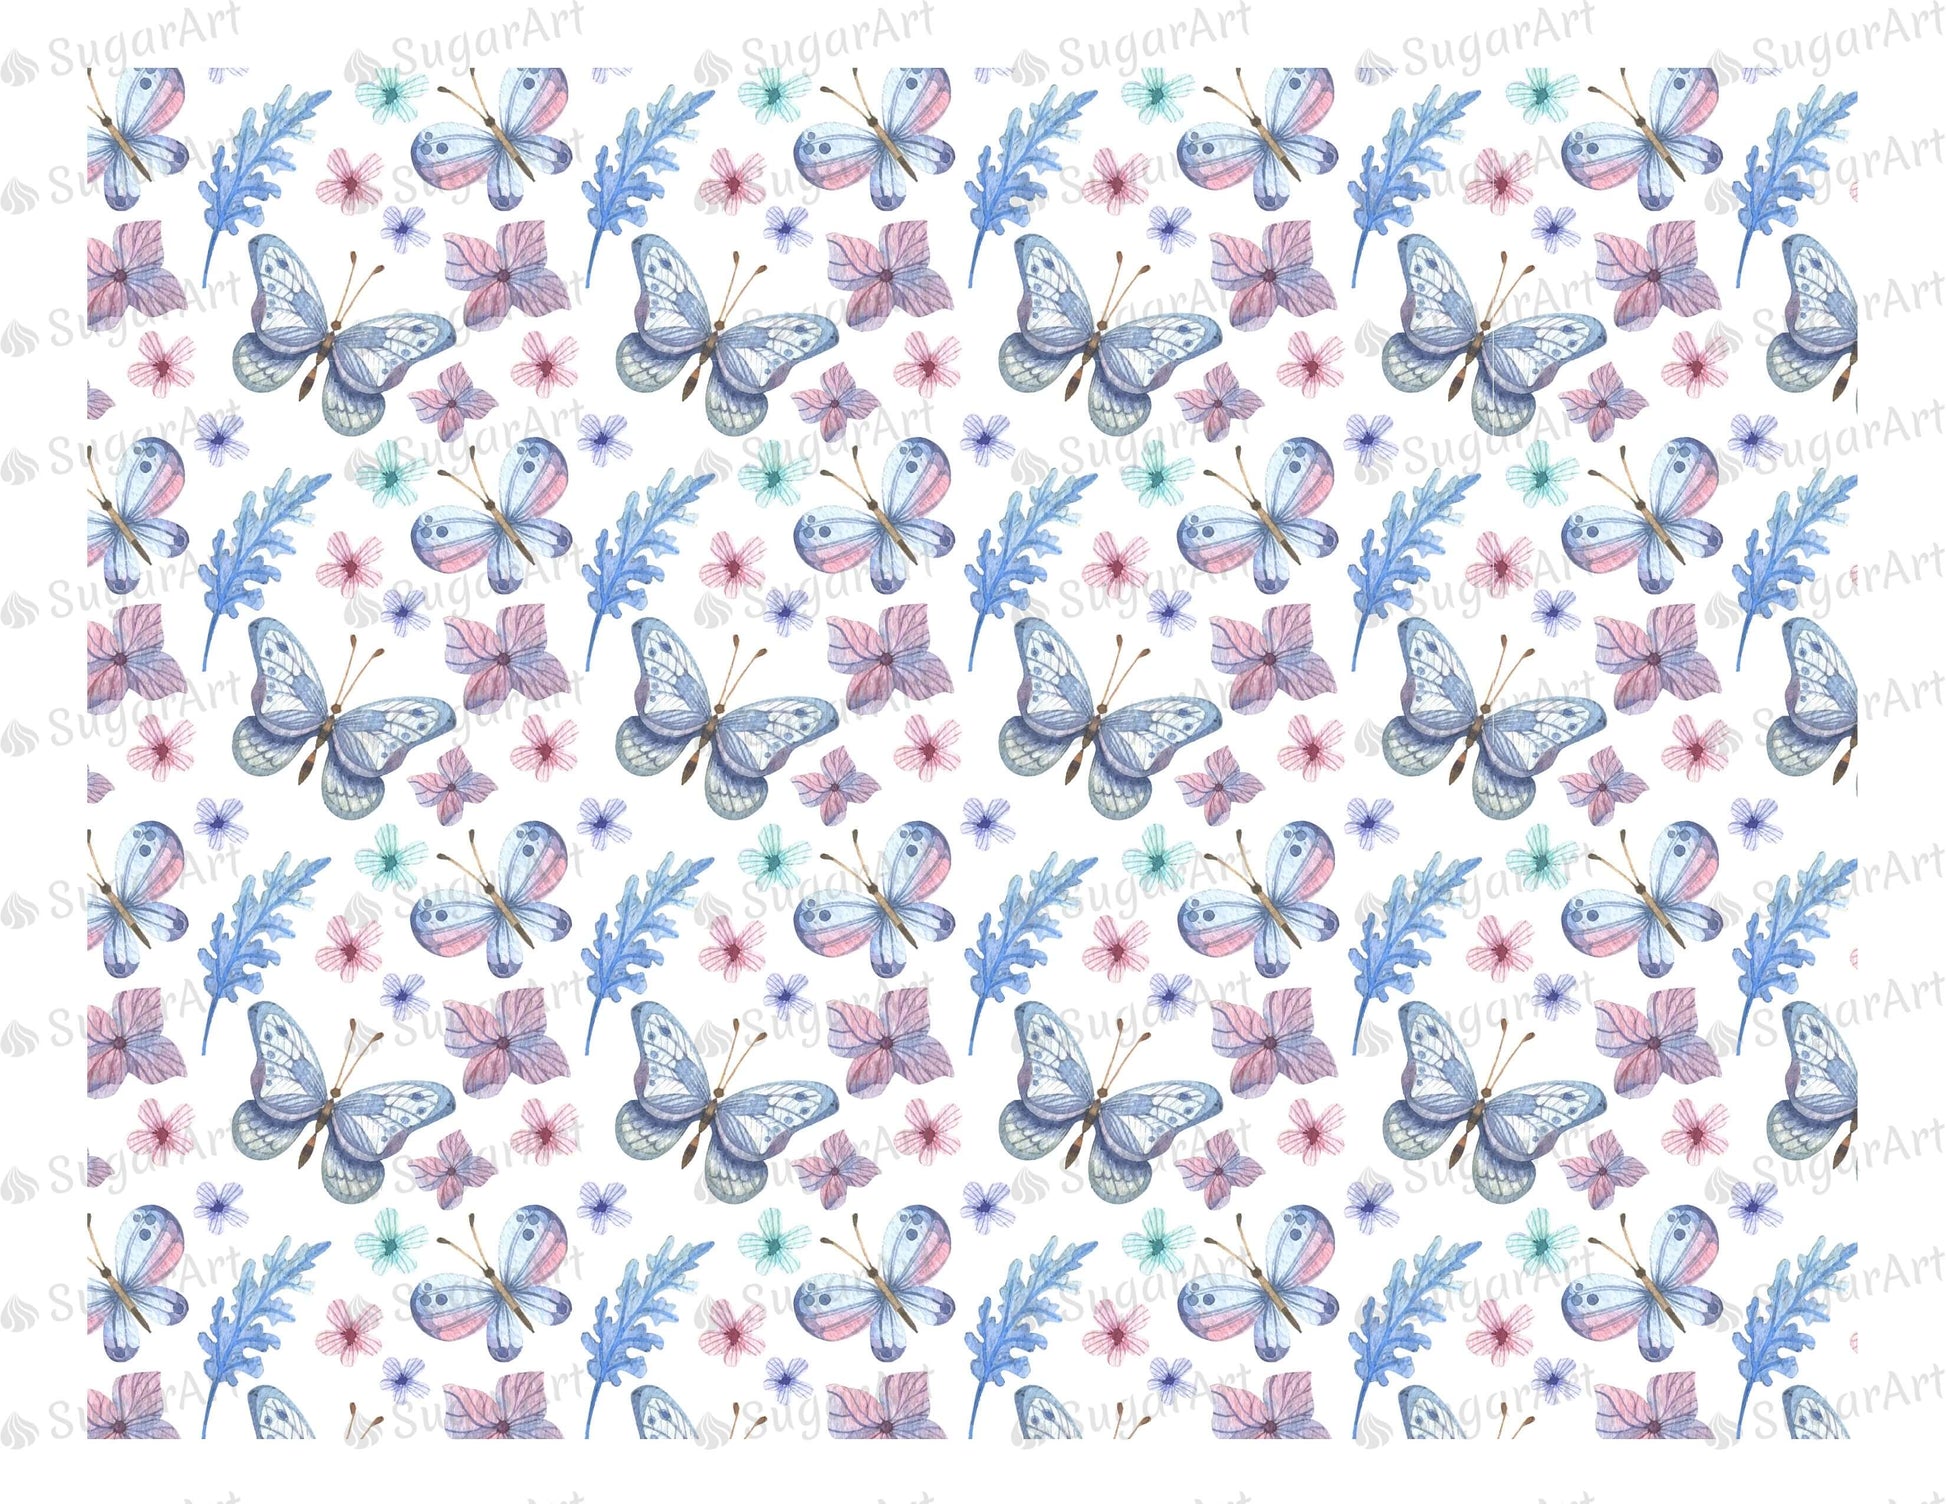 Elegant Pattern of Flowers and Butterflies - Icing - ISA033.